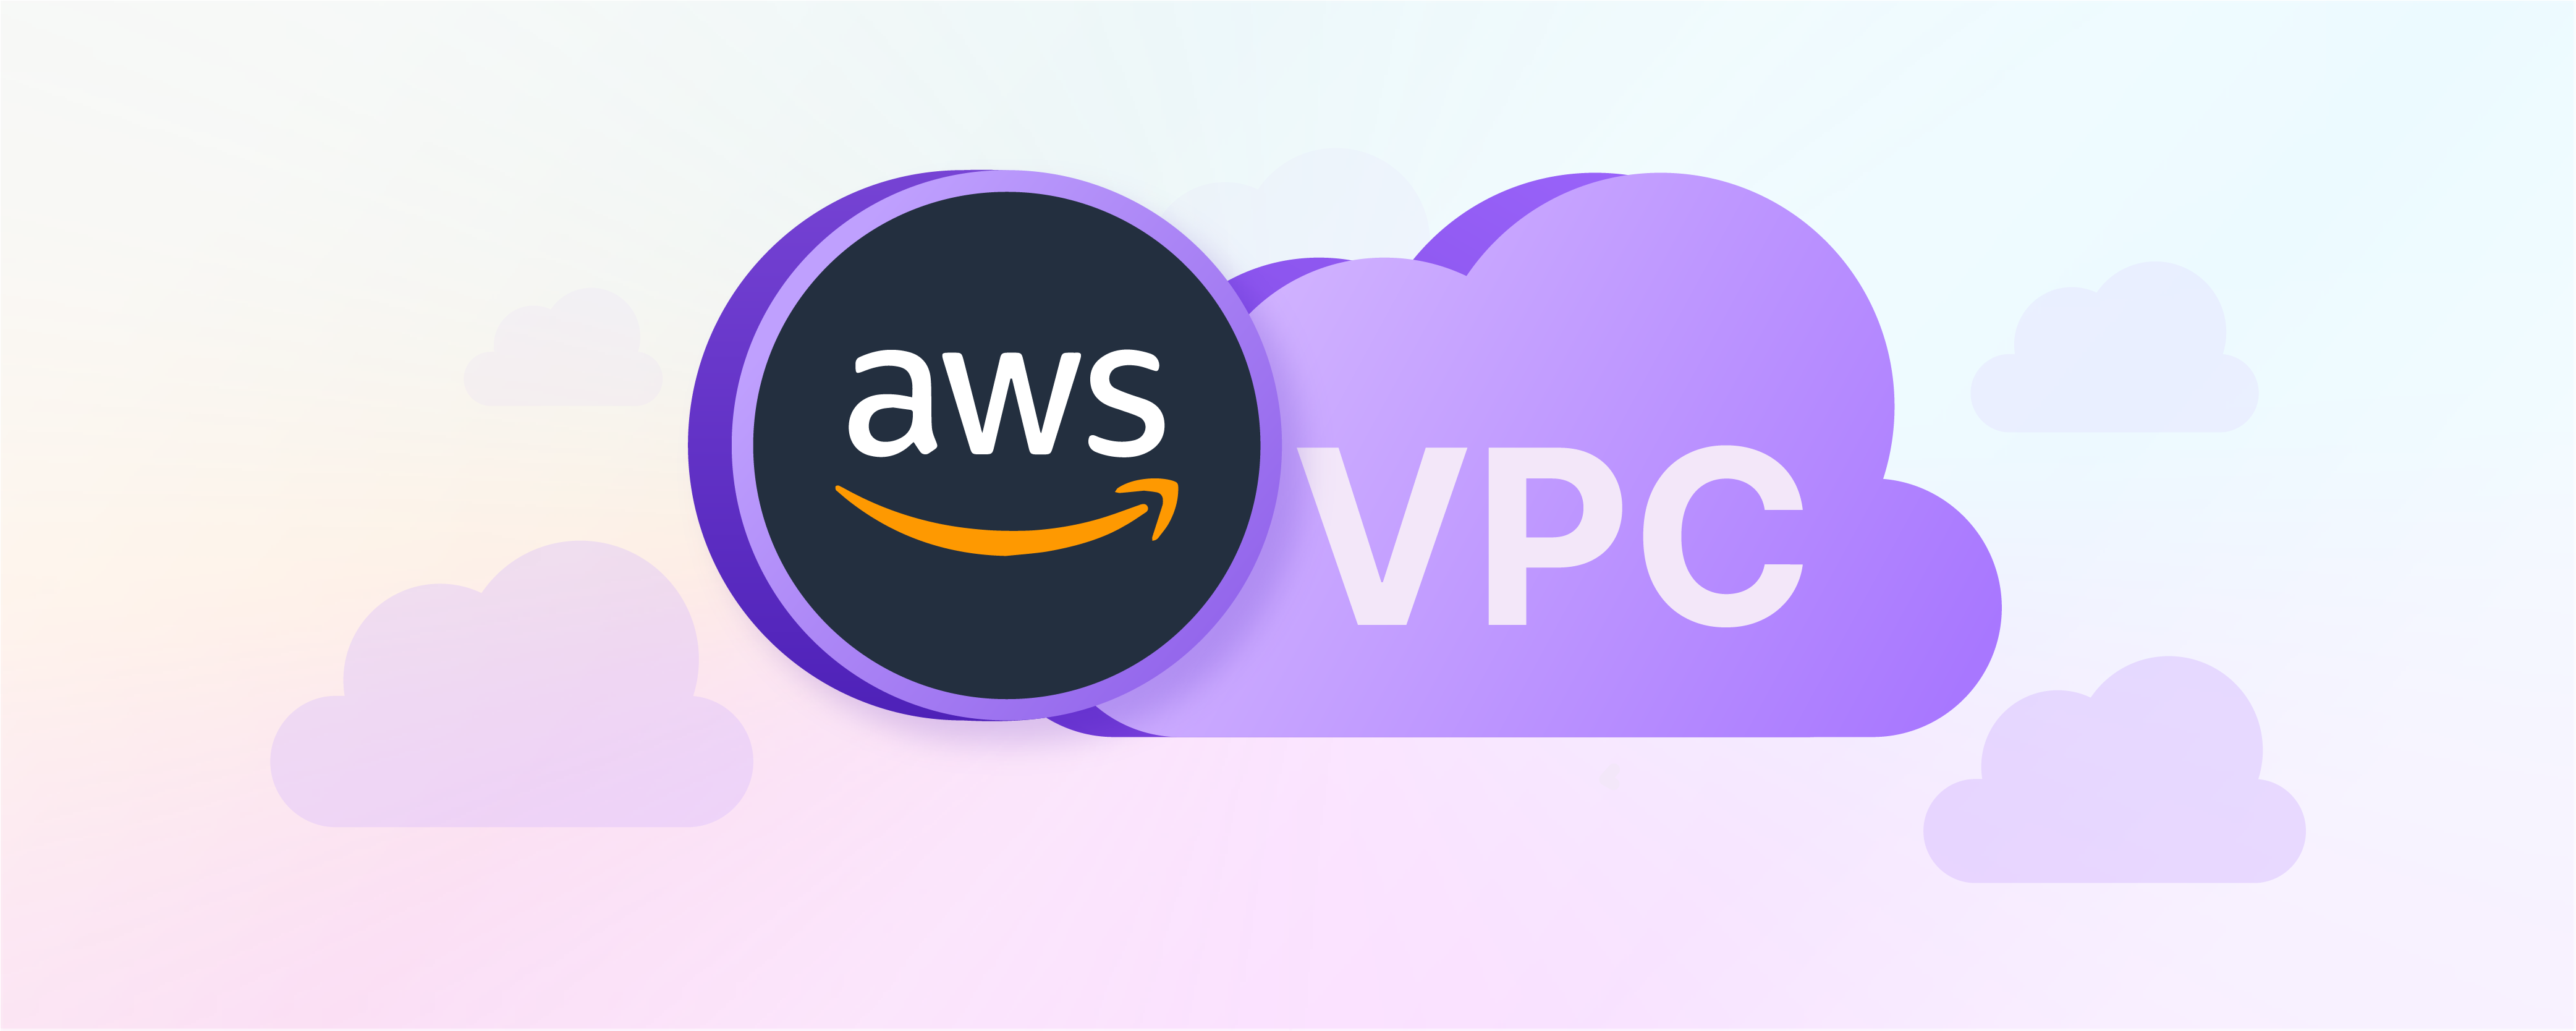 What is Virtual Private Cloud AWS?